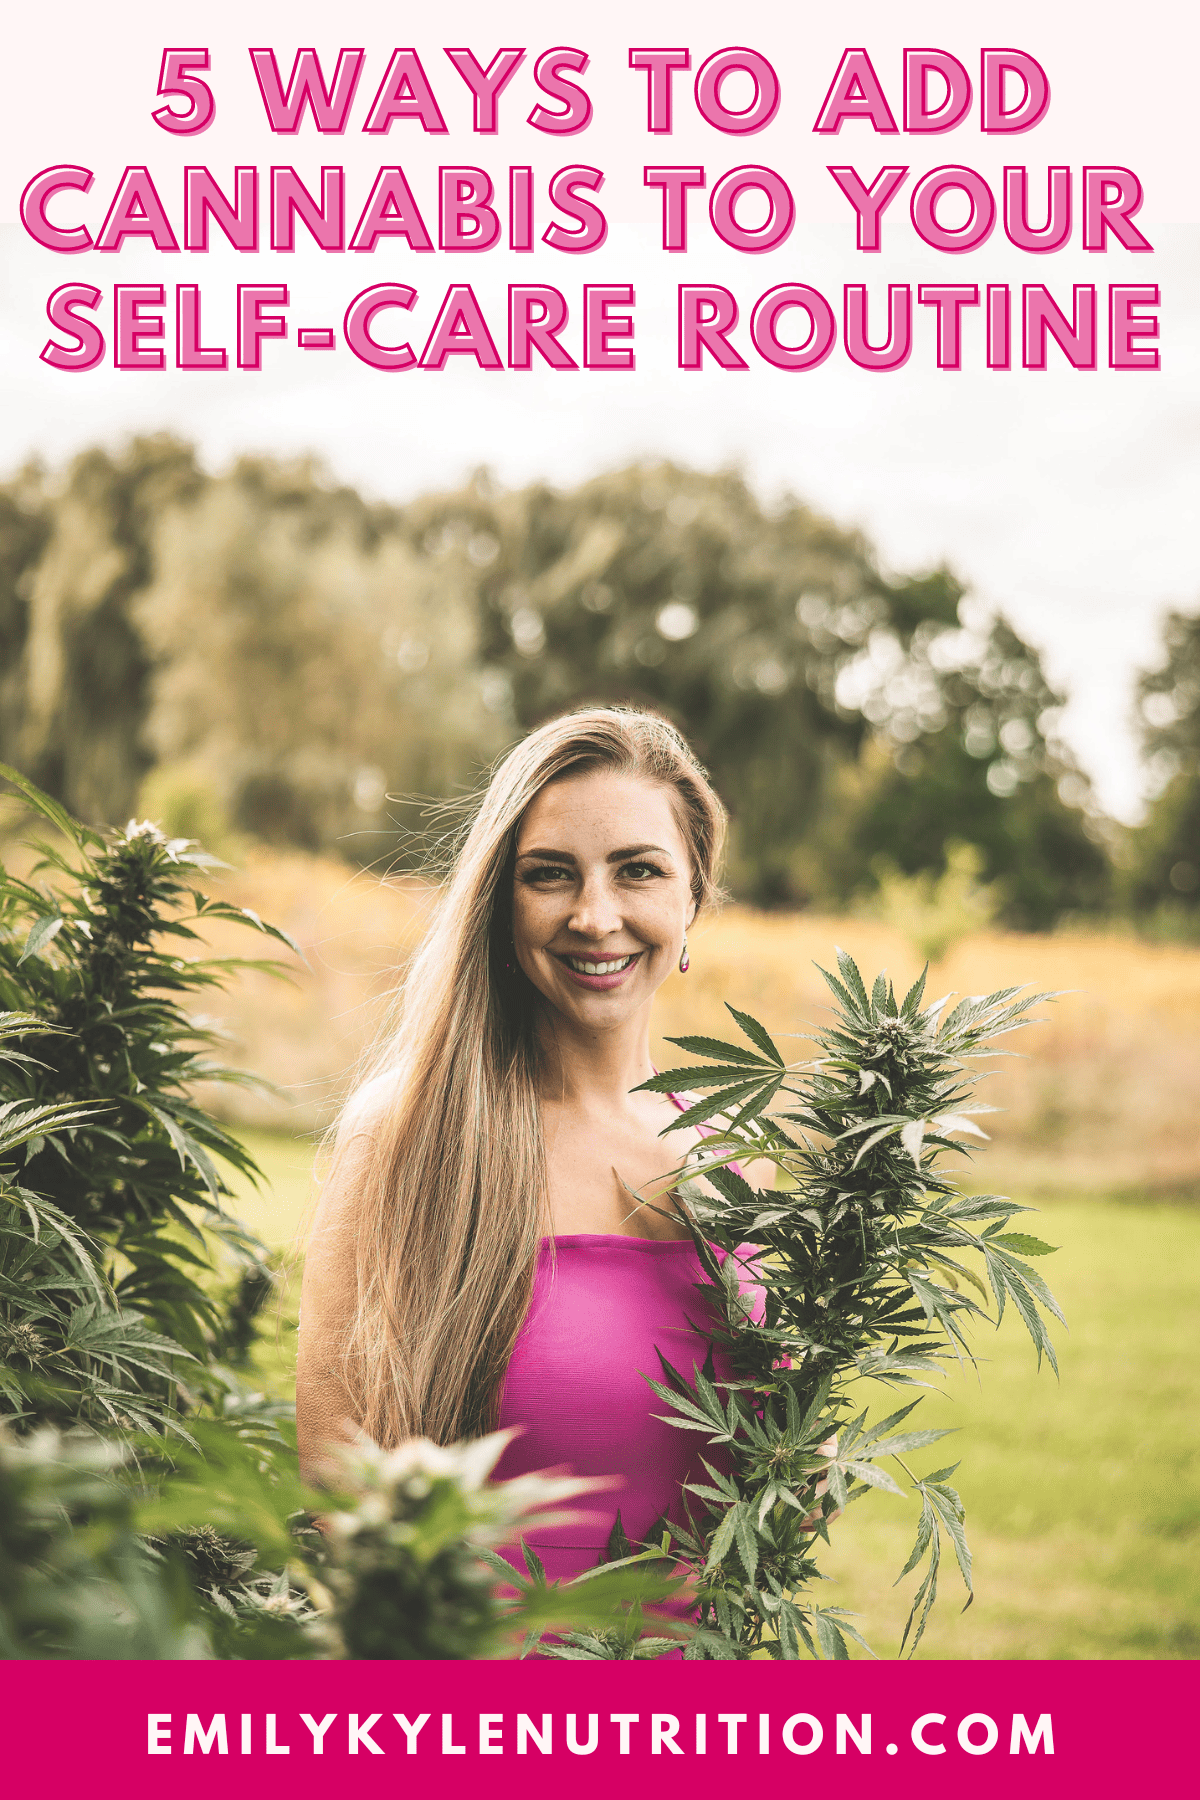 A picture of Emily Kyle with text that says 5 Ways To Add Cannabis to Your Self-Care Routine